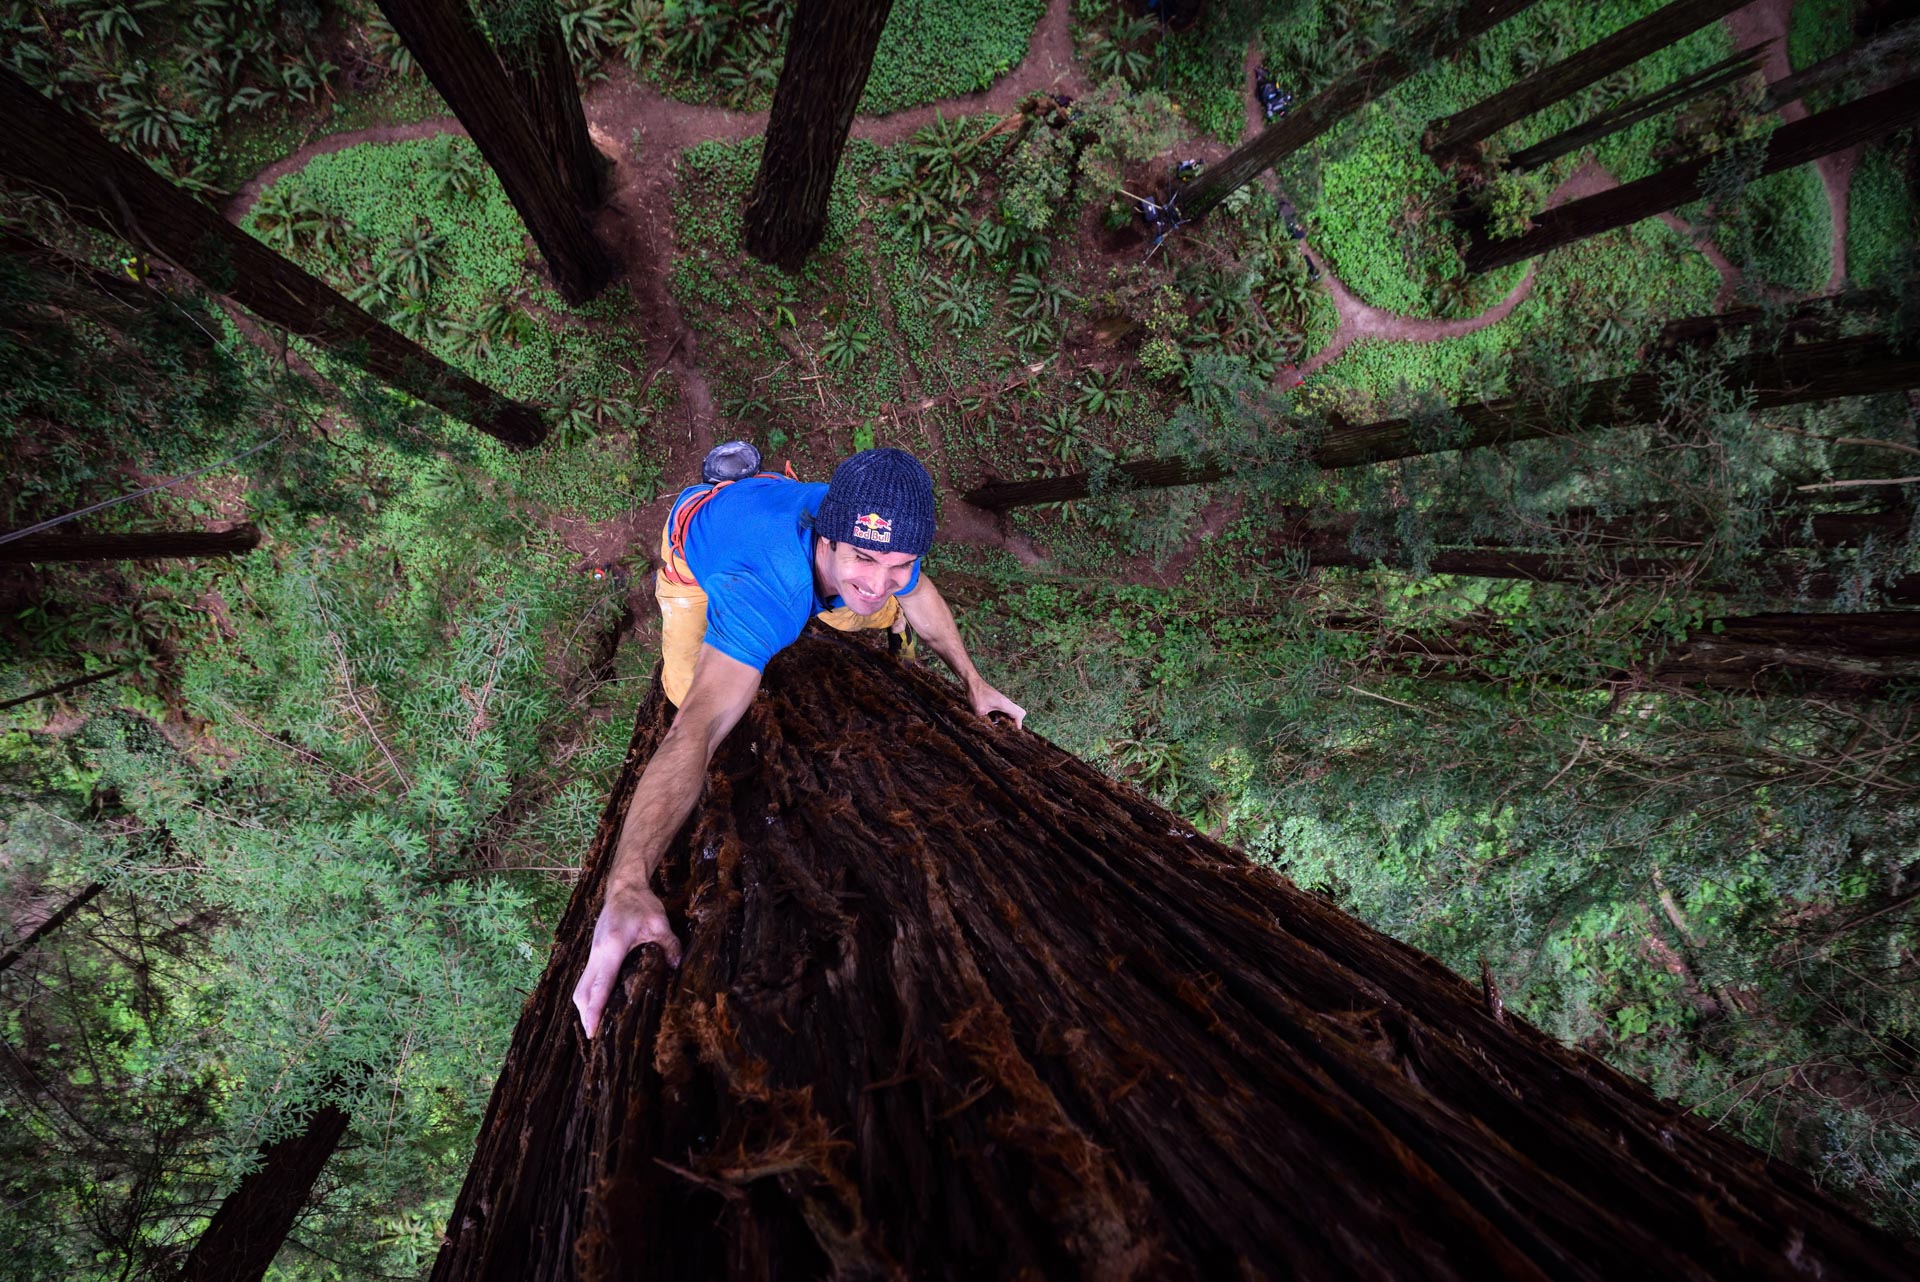 Watch This Guy Free-Climb A Giant Redwood